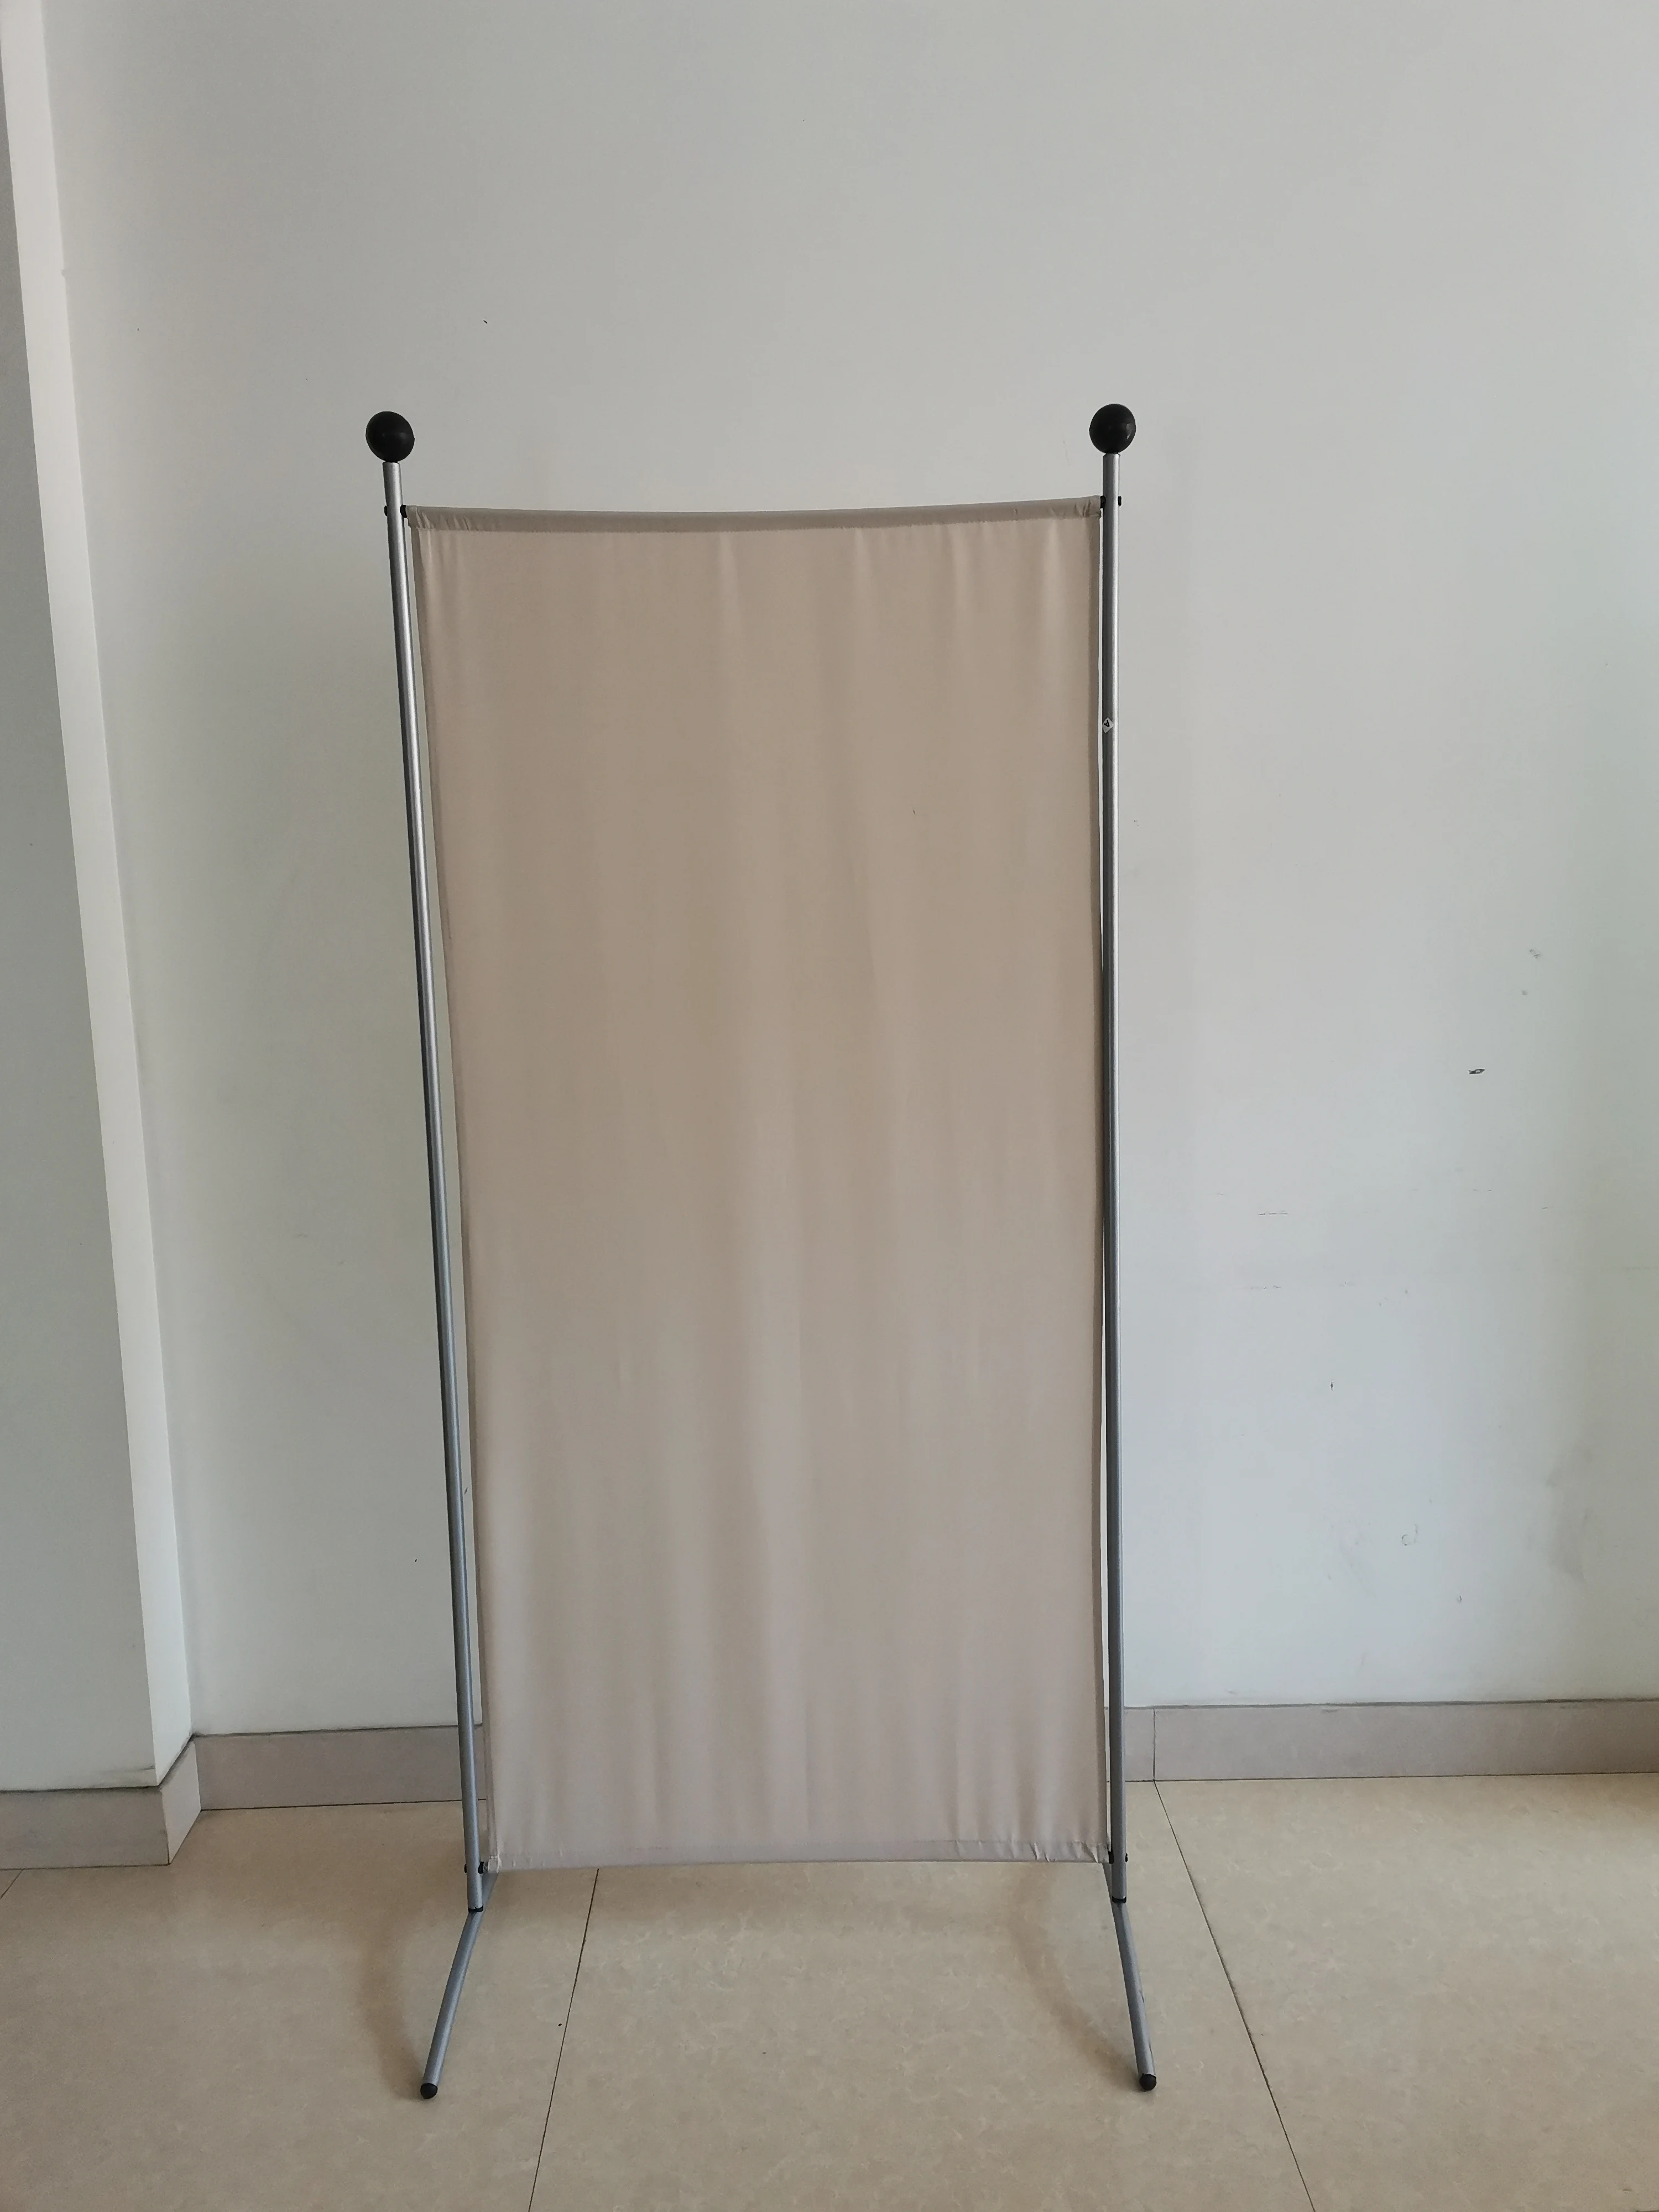 Outdoor indoor Privacy polyester room screen divider